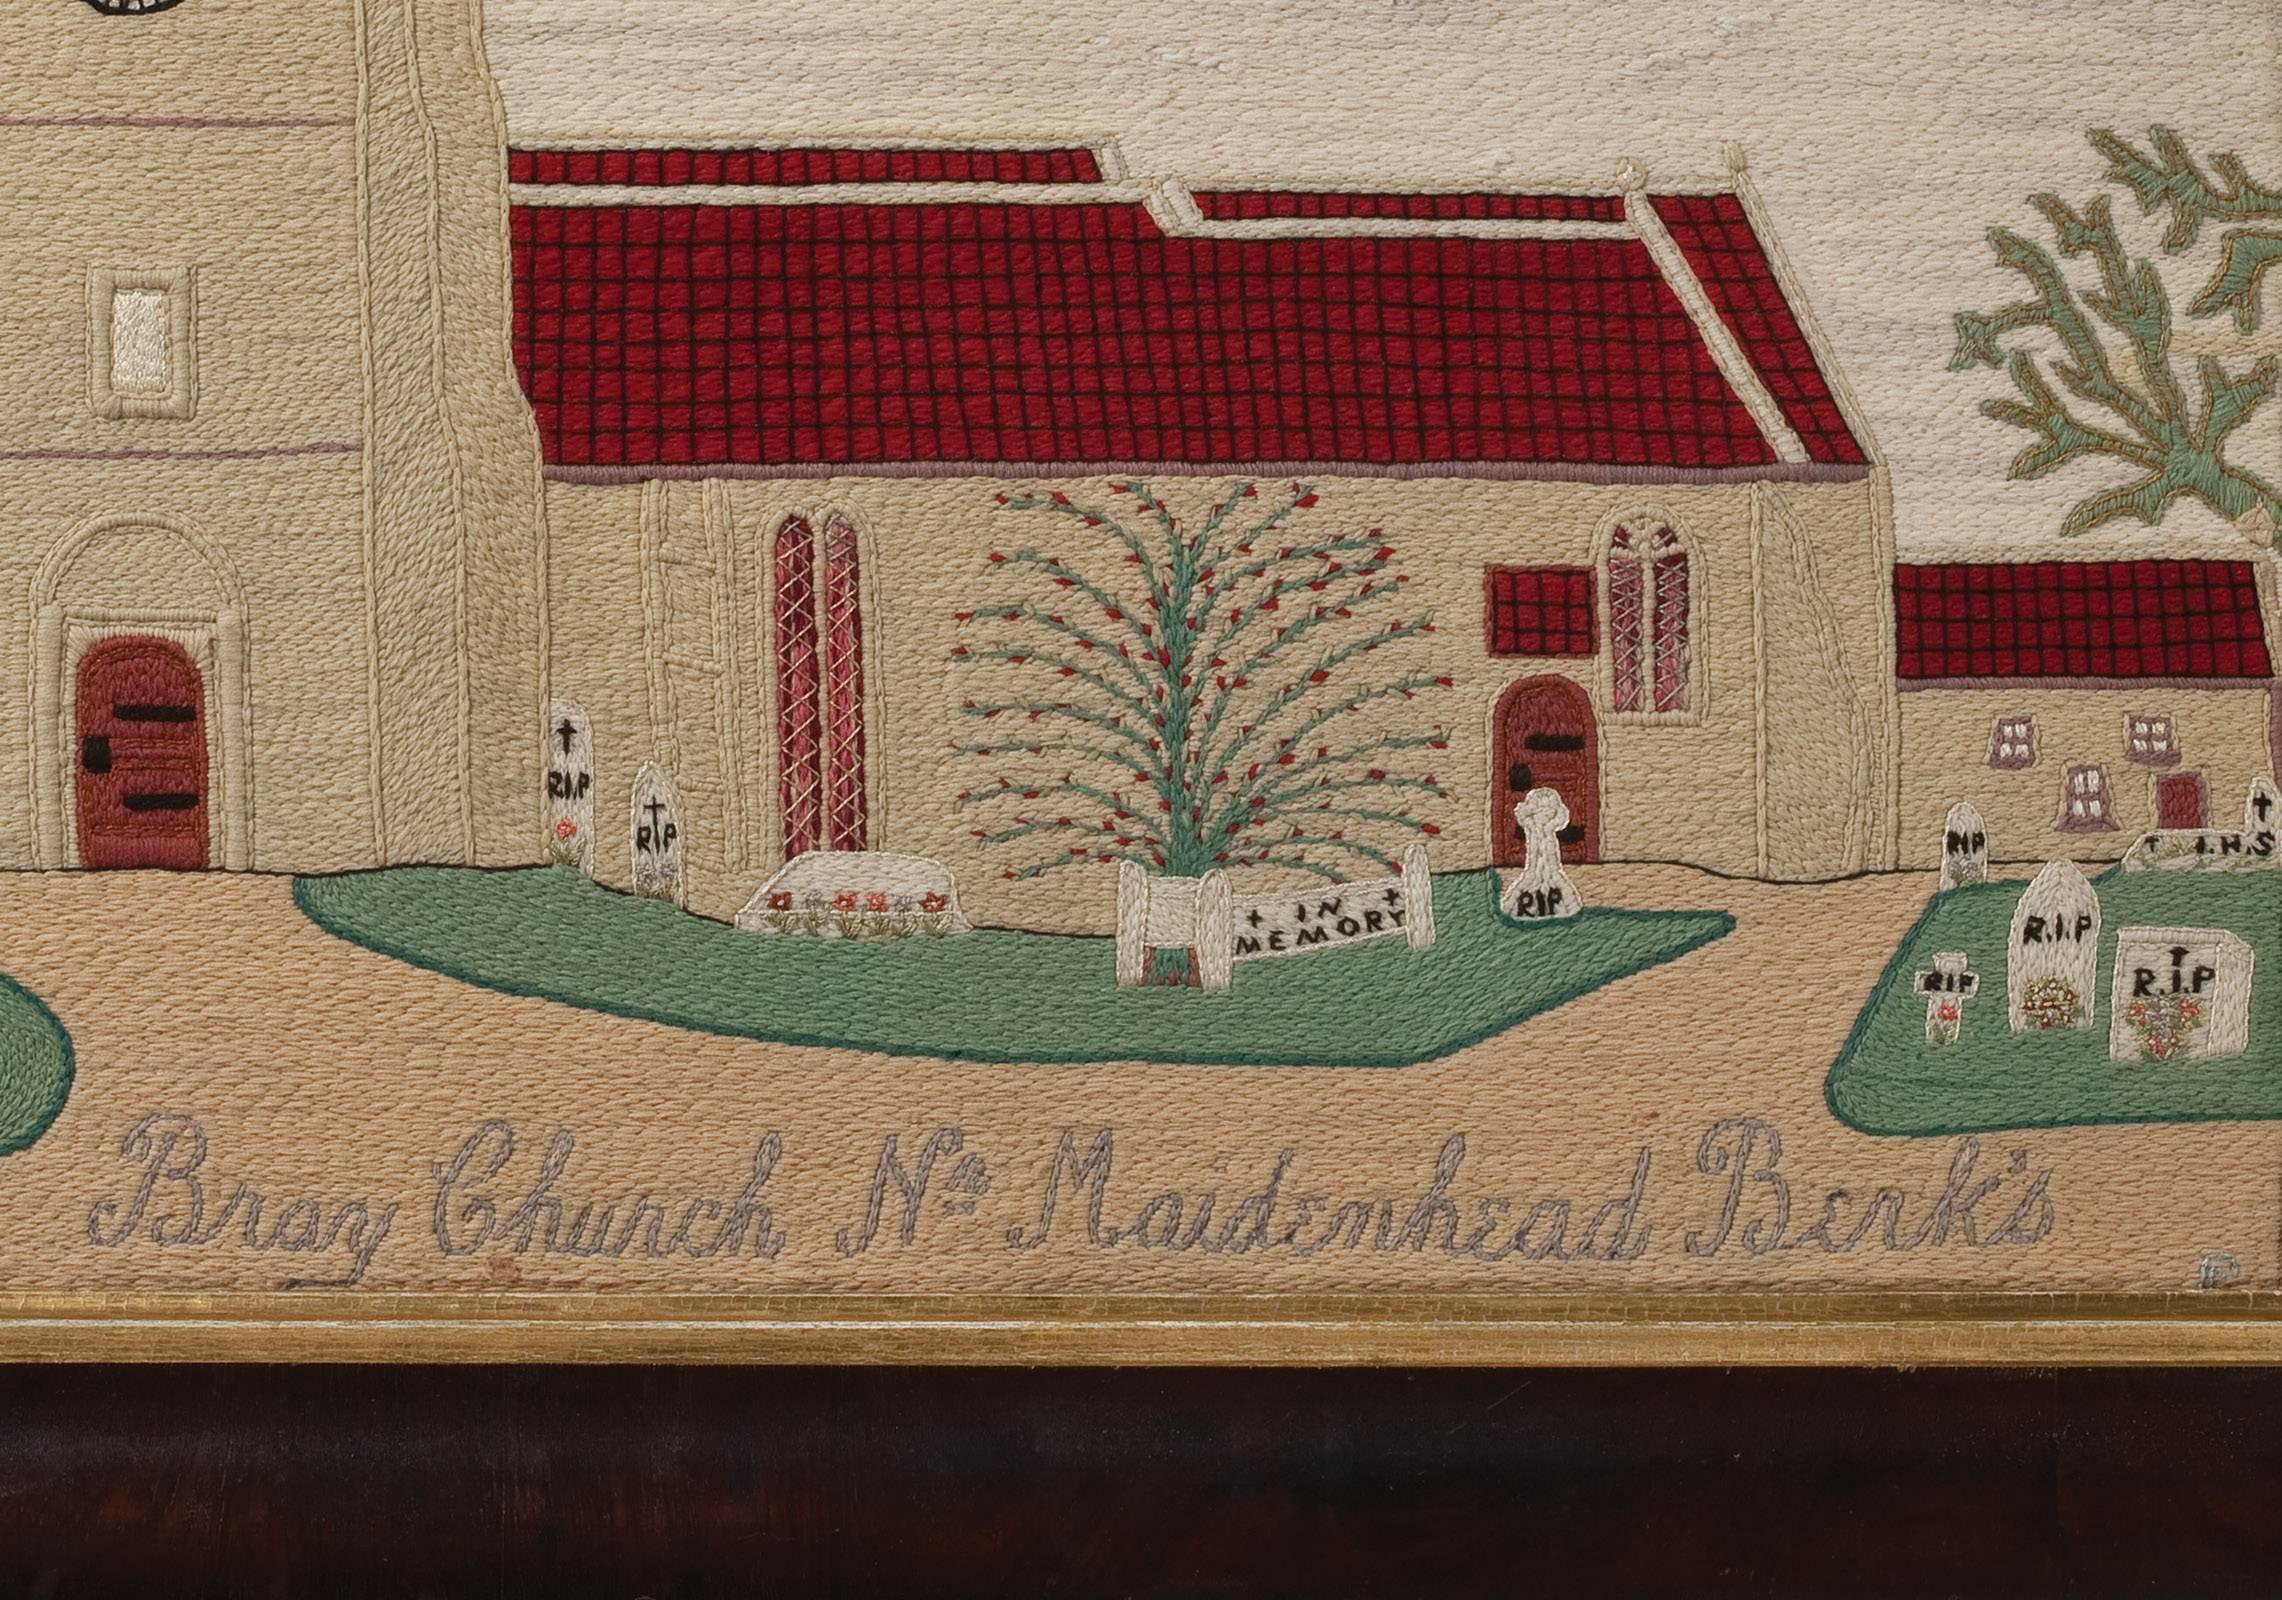 A large and very handsome needlework picture, this is entitled “Bray Church Nr. Maidenhead Berks” and the subject is the wonderful, famed medieval church built in 1293. Located in Berkshire, six miles from Windsor Castle, its patroness was Queen